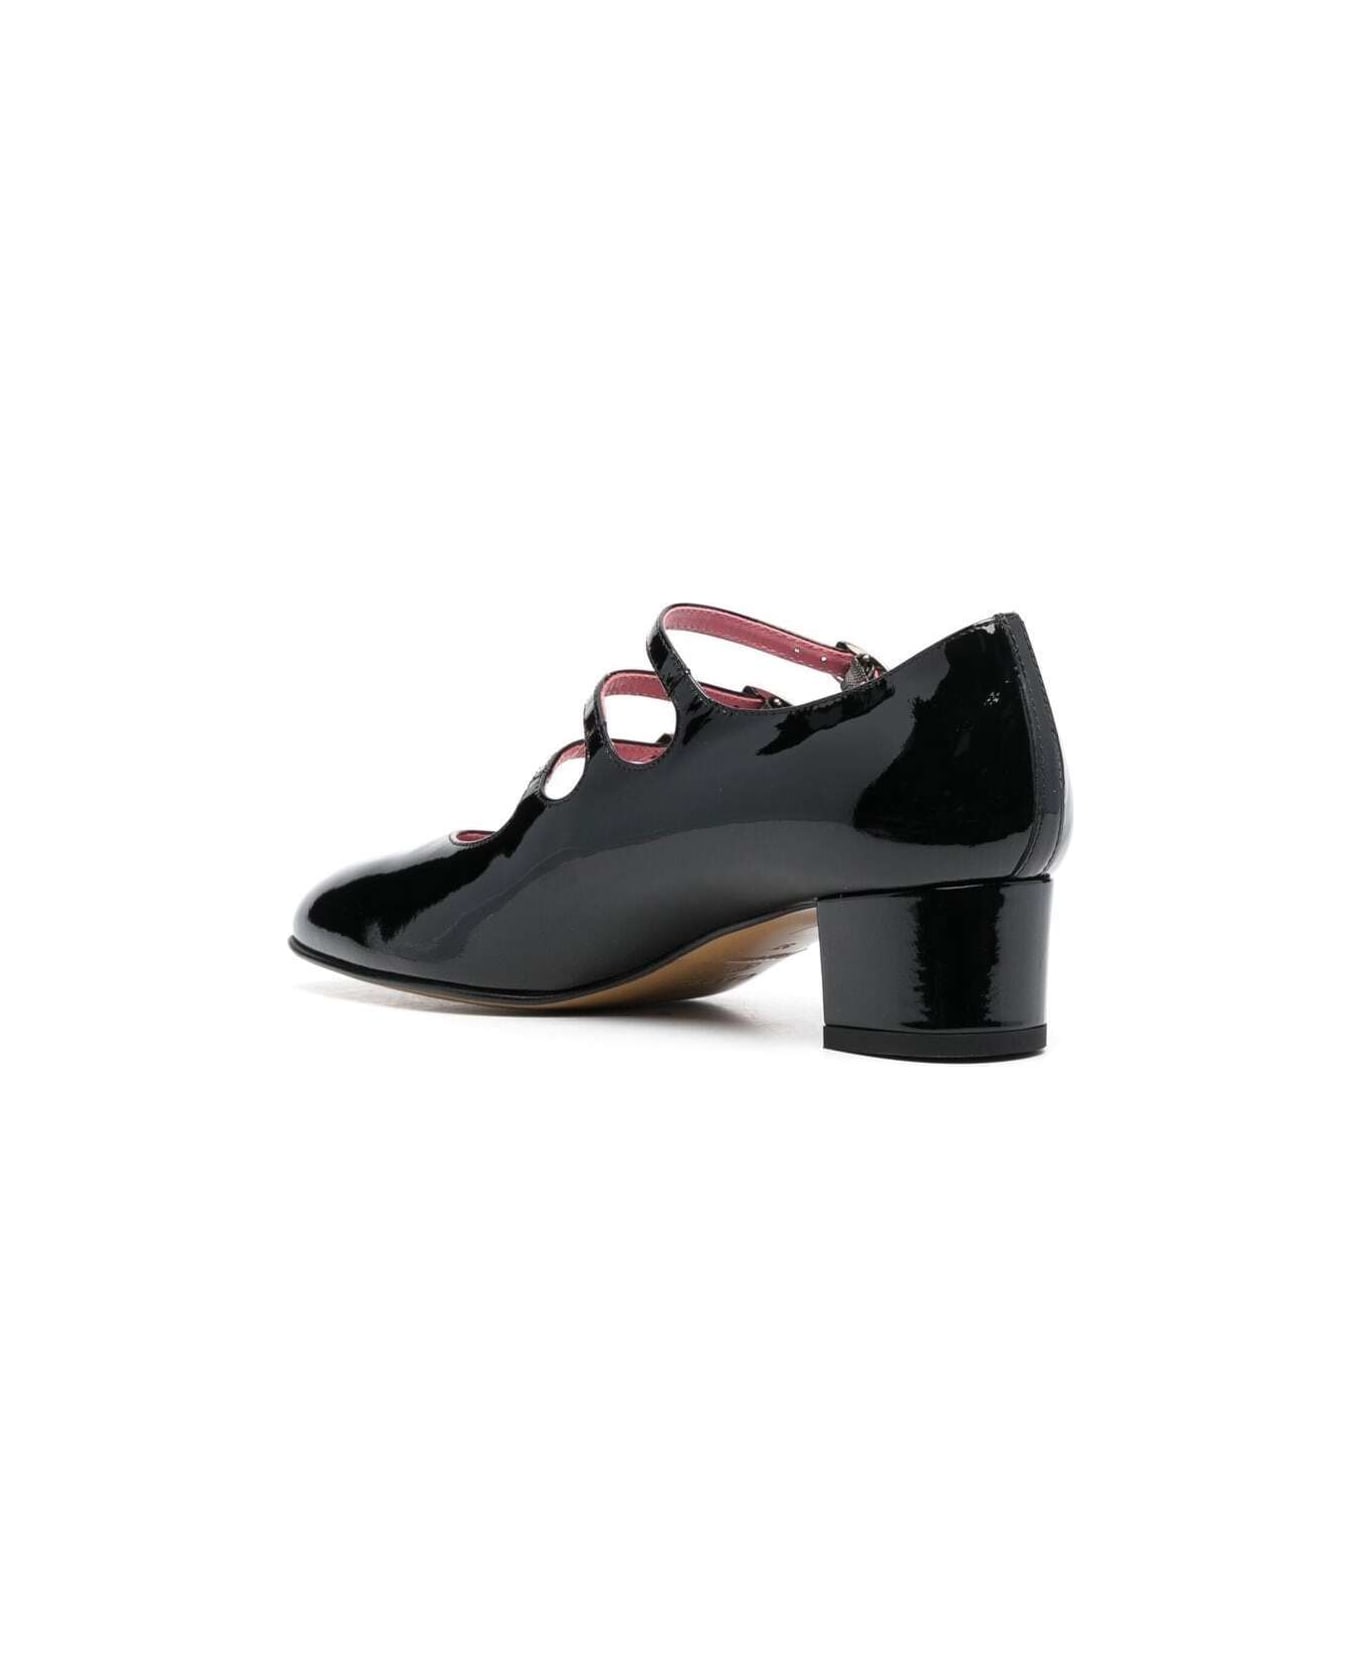 Carel 'kina' Black Mary Janes With Straps And Block Heel In Patent Leather Woman - Black ハイヒール